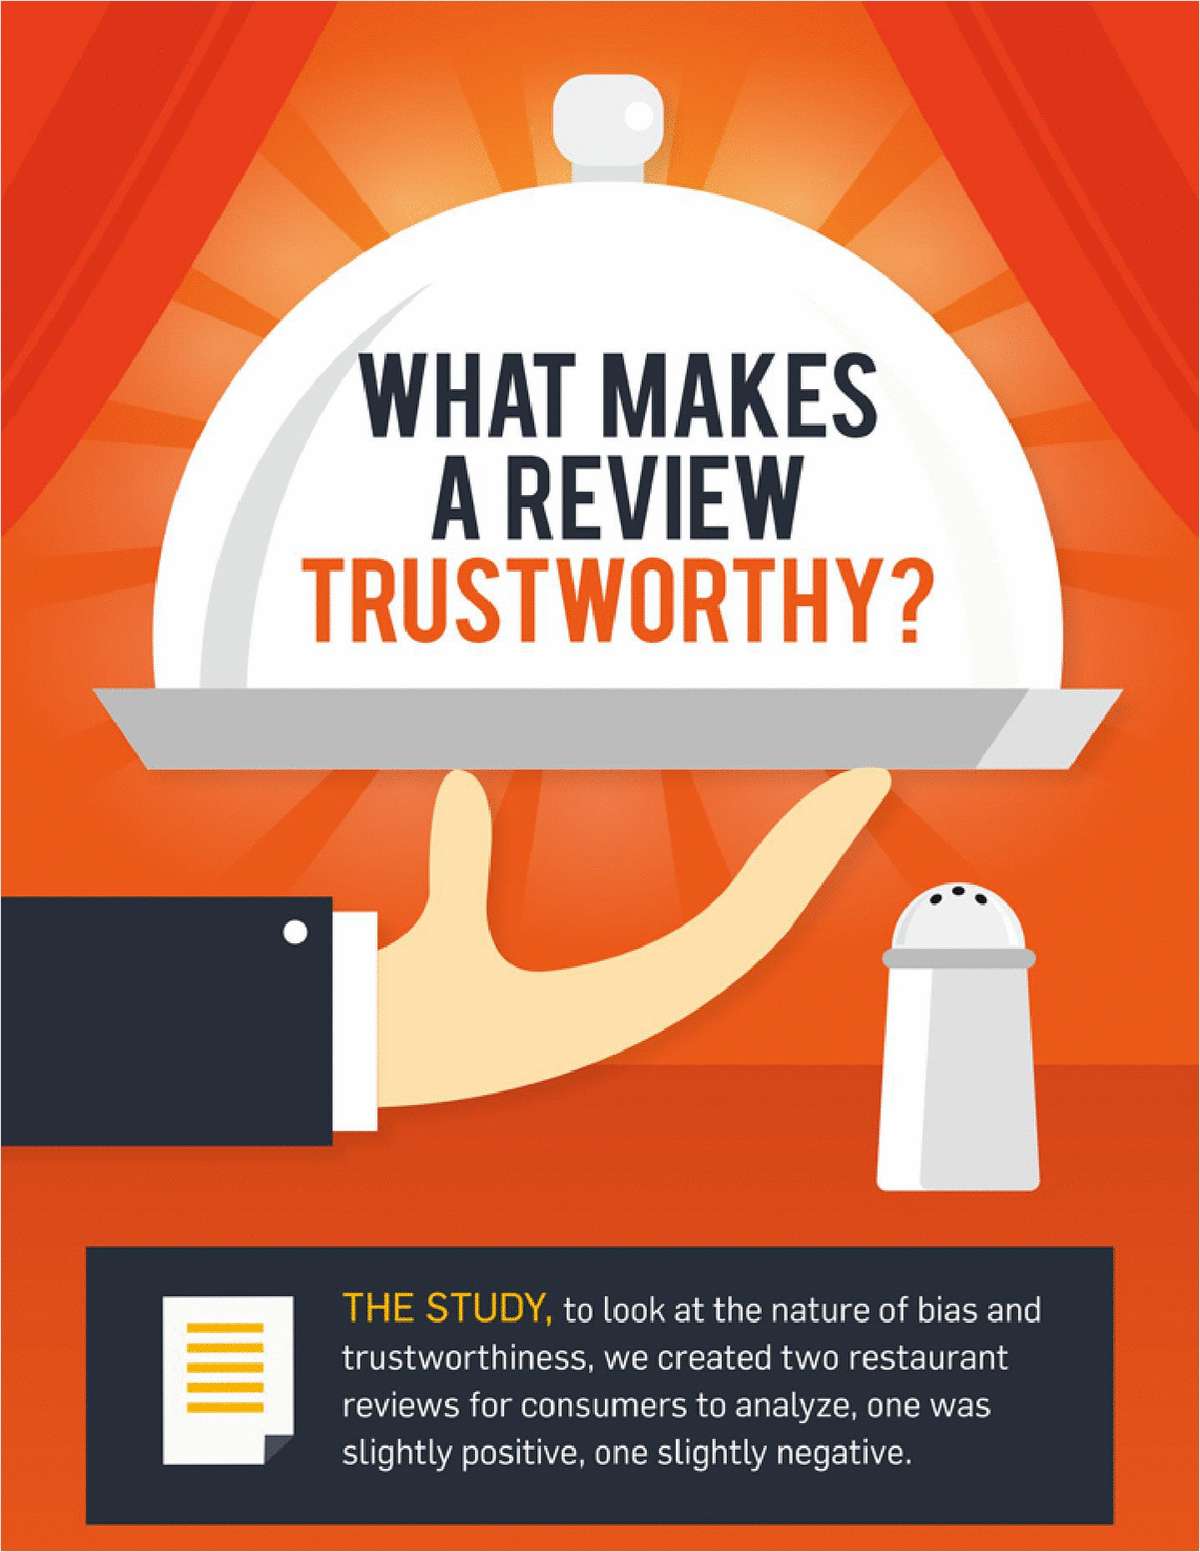 What Makes A Review Trustworthy?